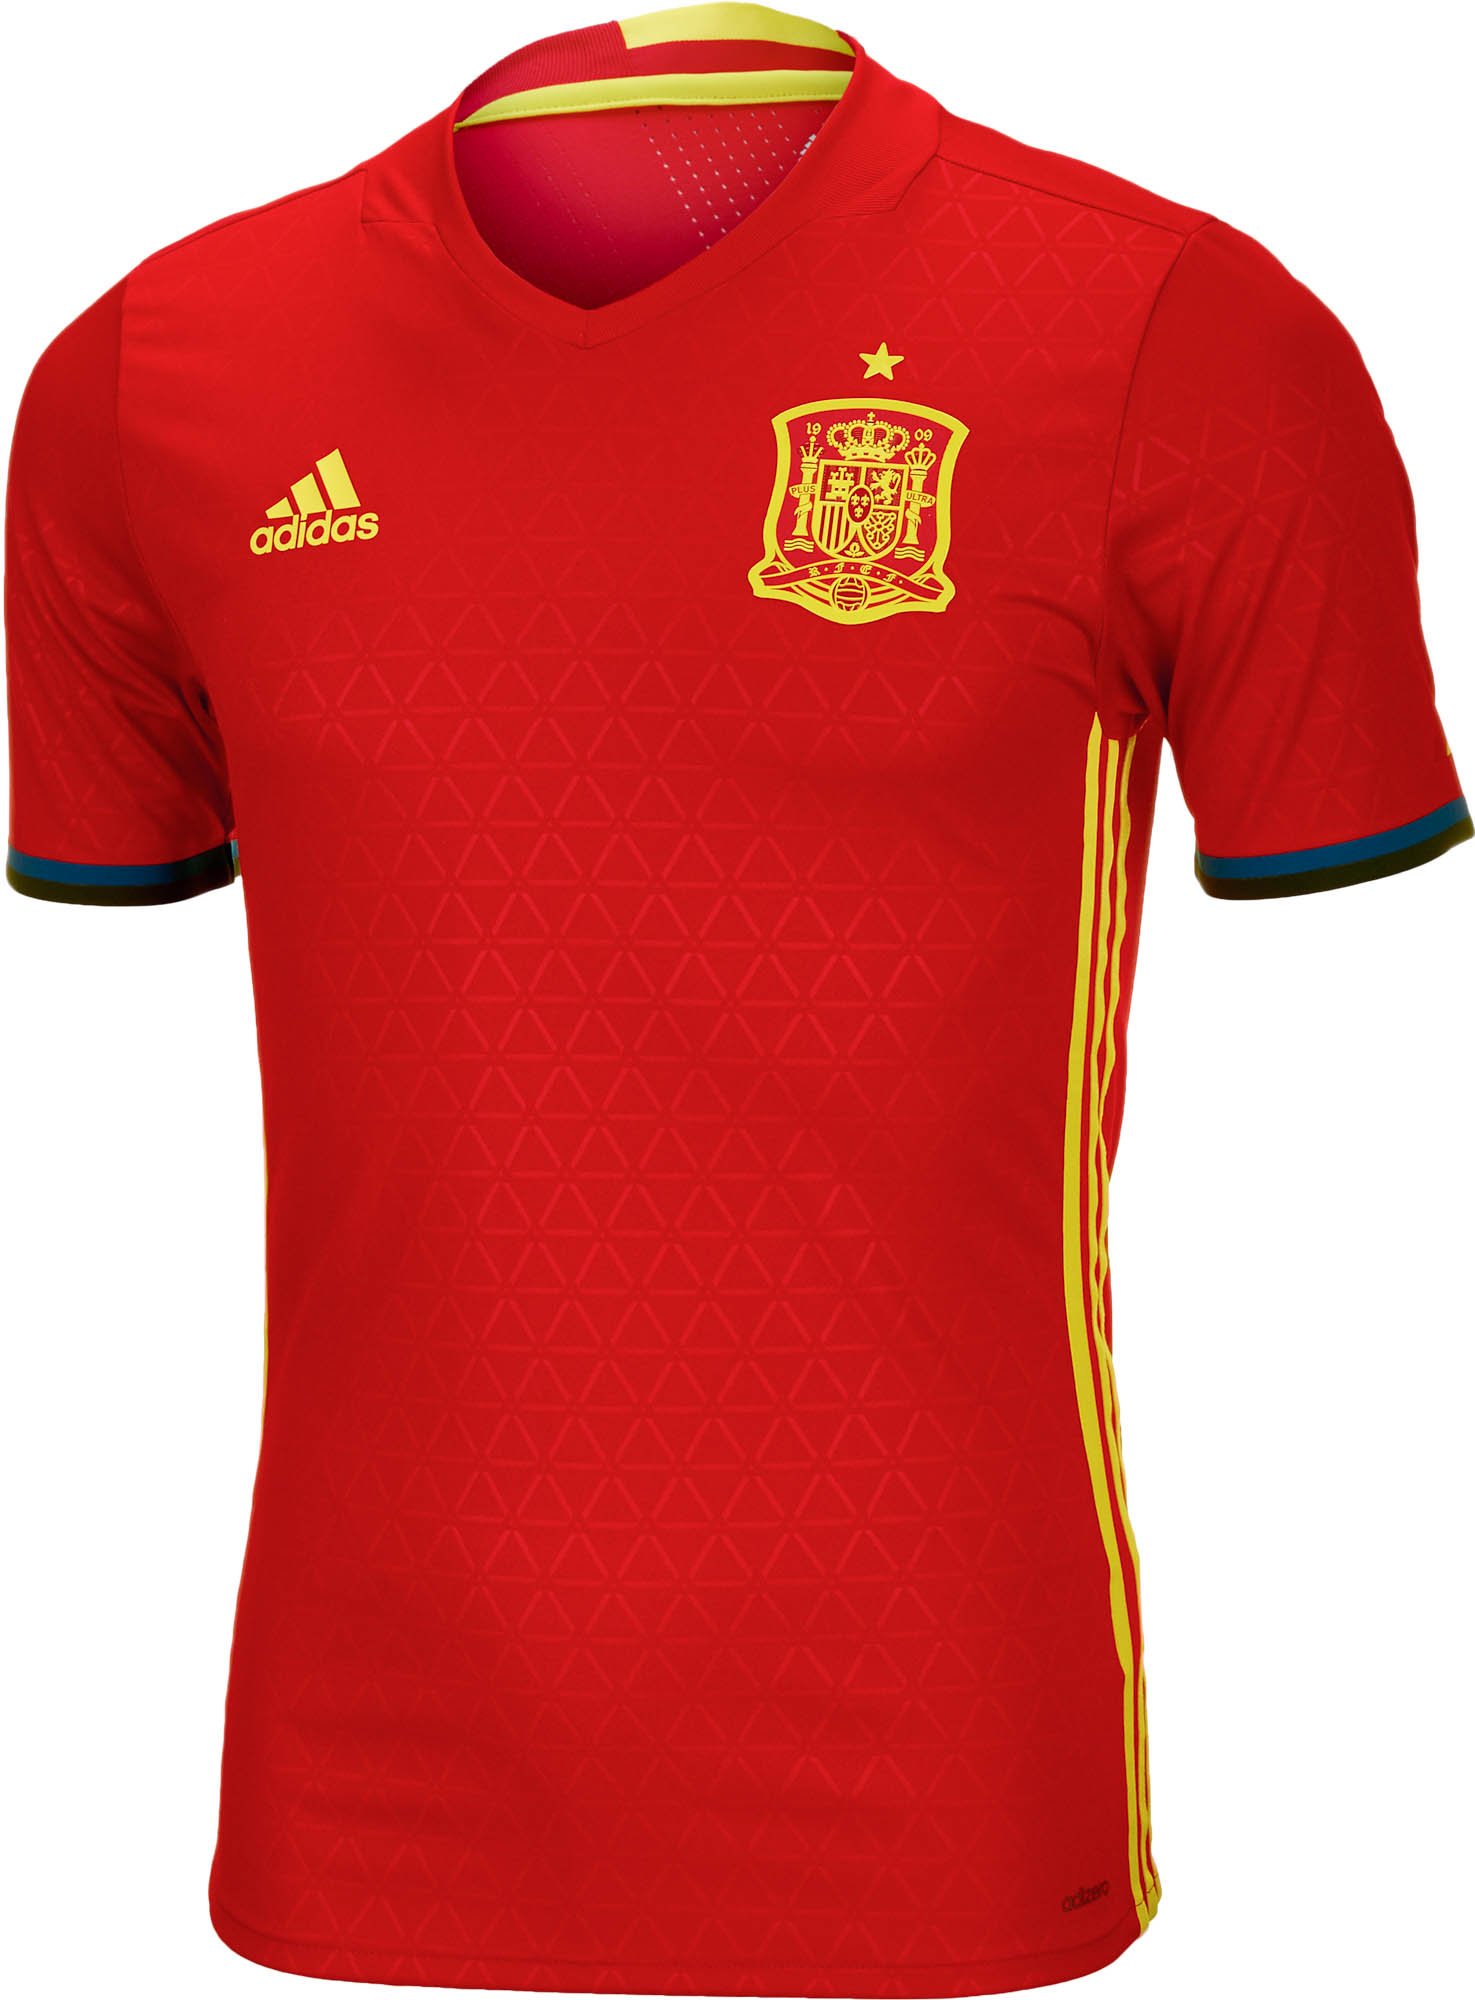 adidas authentic soccer jersey size chart